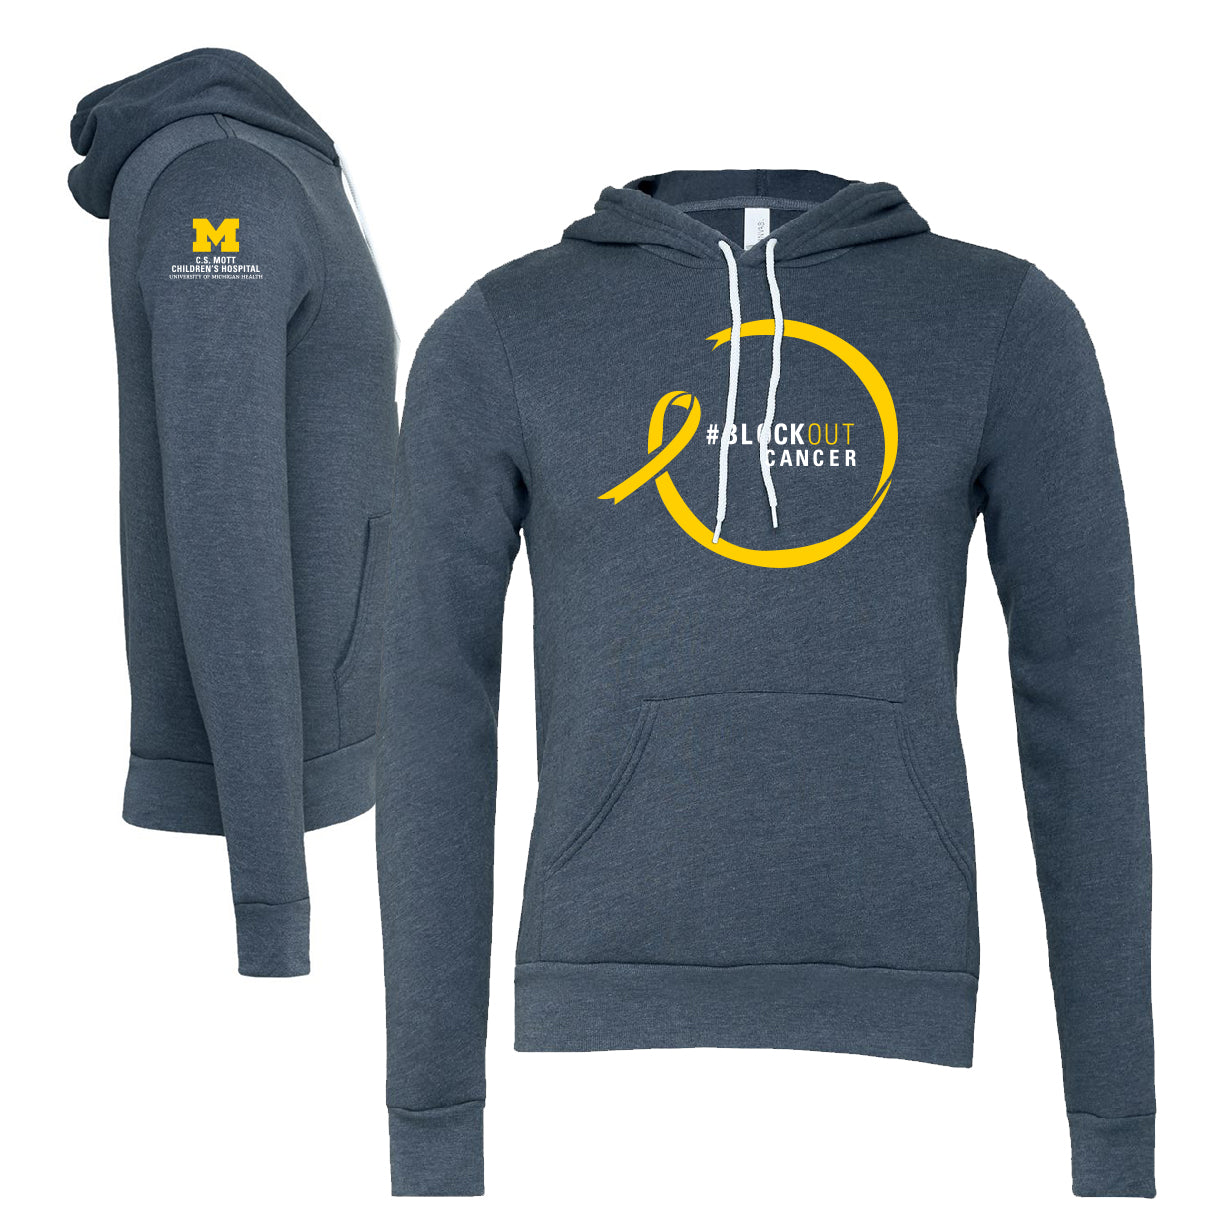 2023 Block Out Cancer Michigan Medicine Apparel Adult Poly-Cotton Fleece Hoodie- Heather Navy